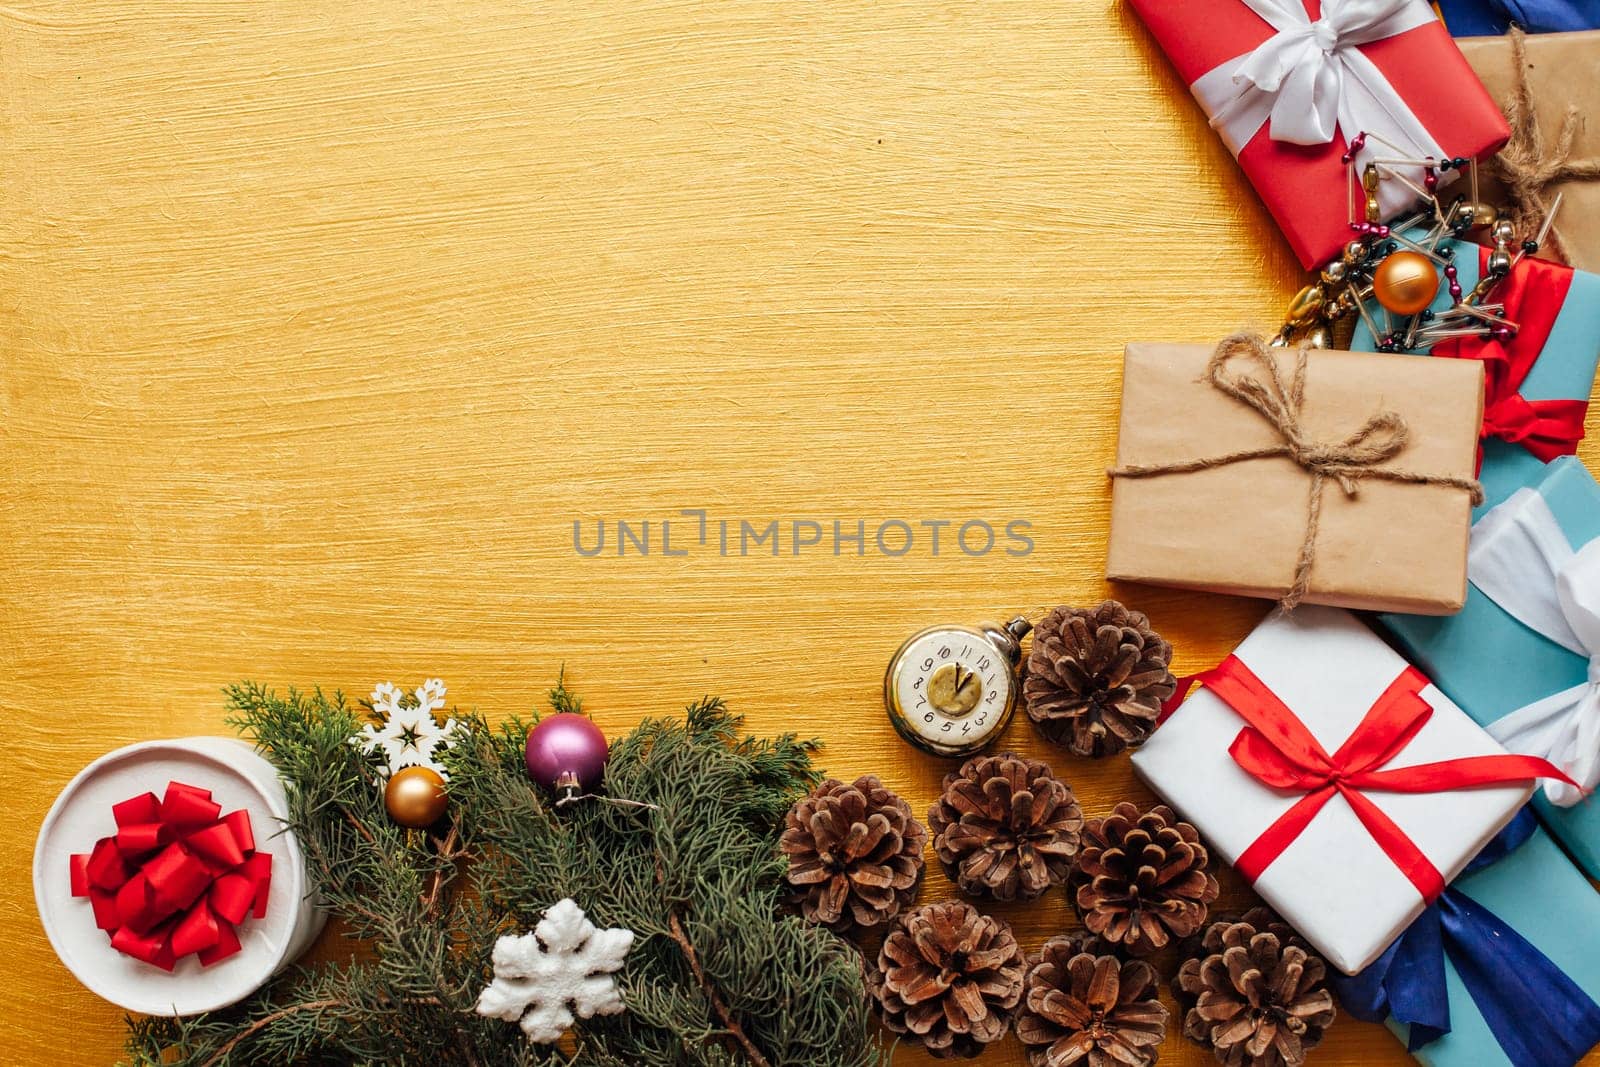 Christmas card gifts decor for the new year on a golden background